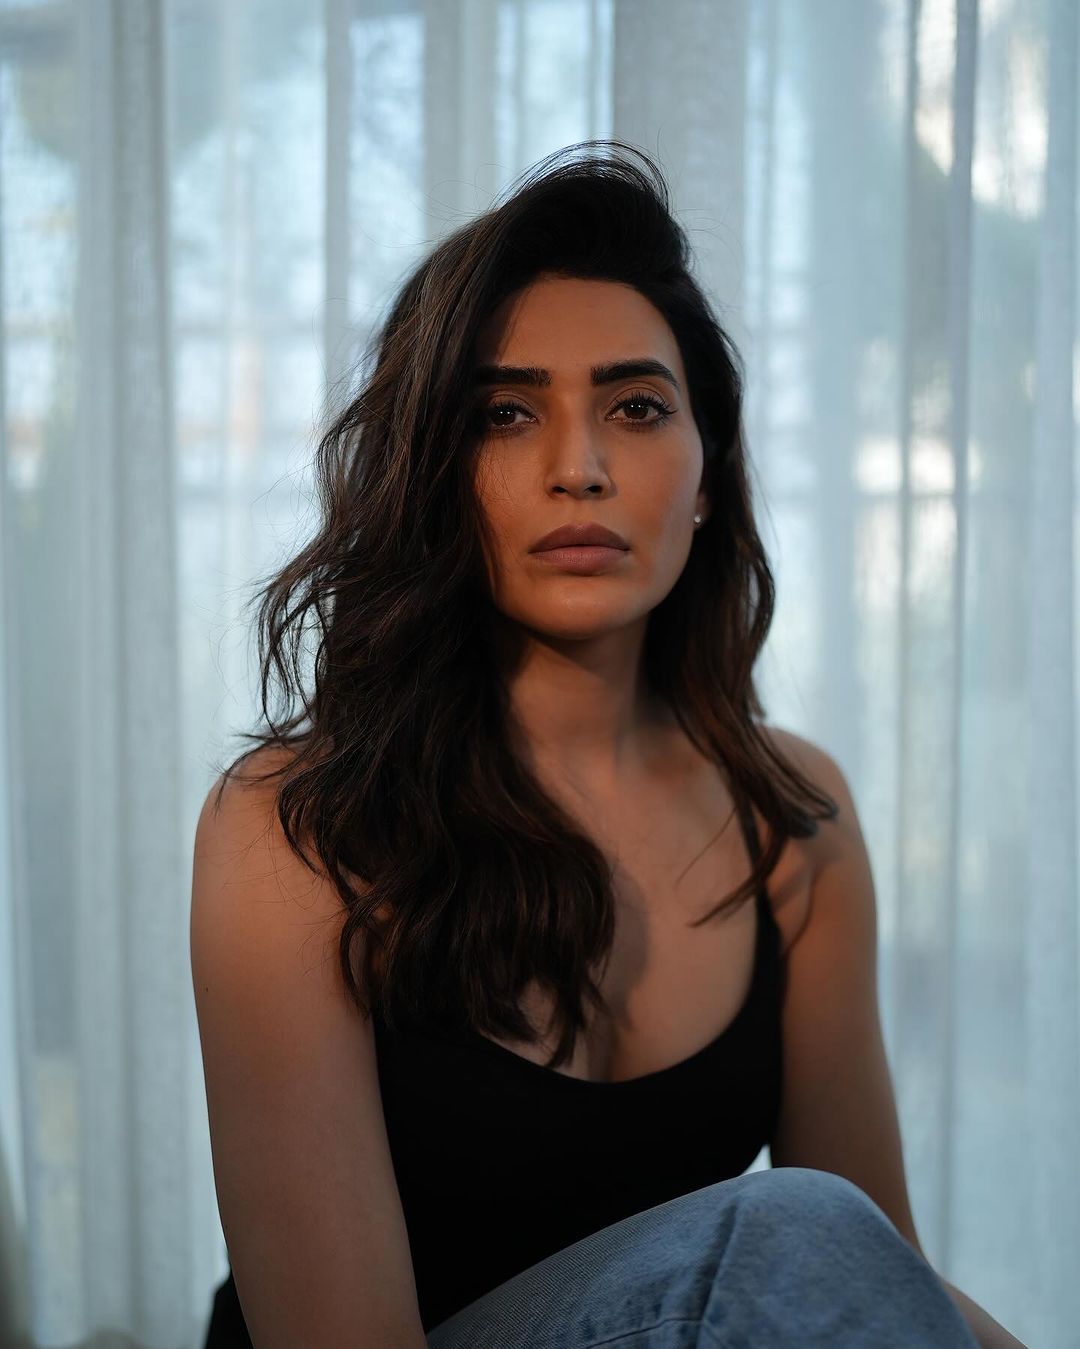 Stylish Indian Television Actress Karishma Tanna well-known for her role in Naagin 3 Shared A Glimpse of Her Hot Photoshoot